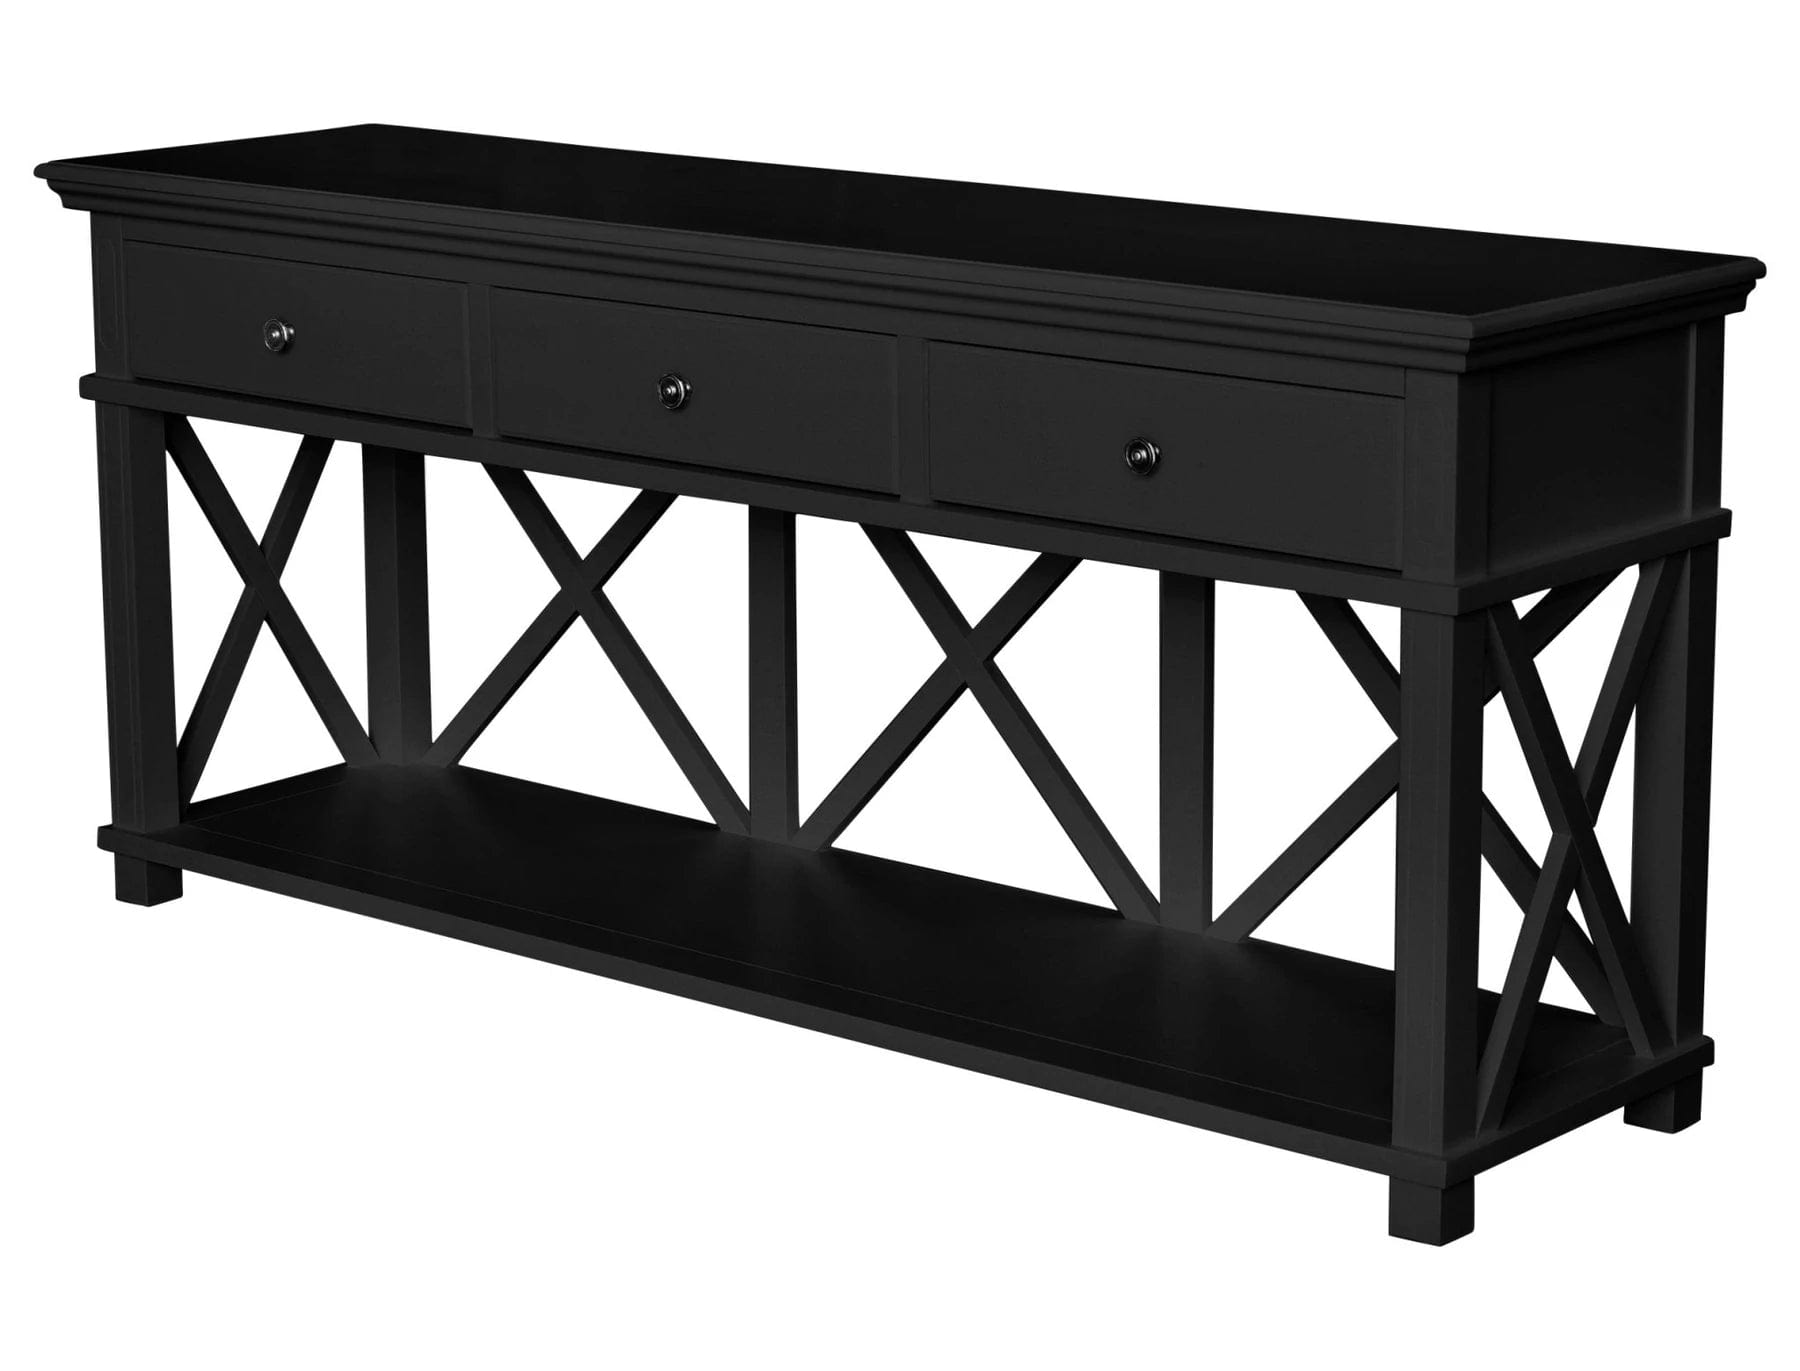 SORRENTO BLACK 3 DRAWER CONSOLE TABLE